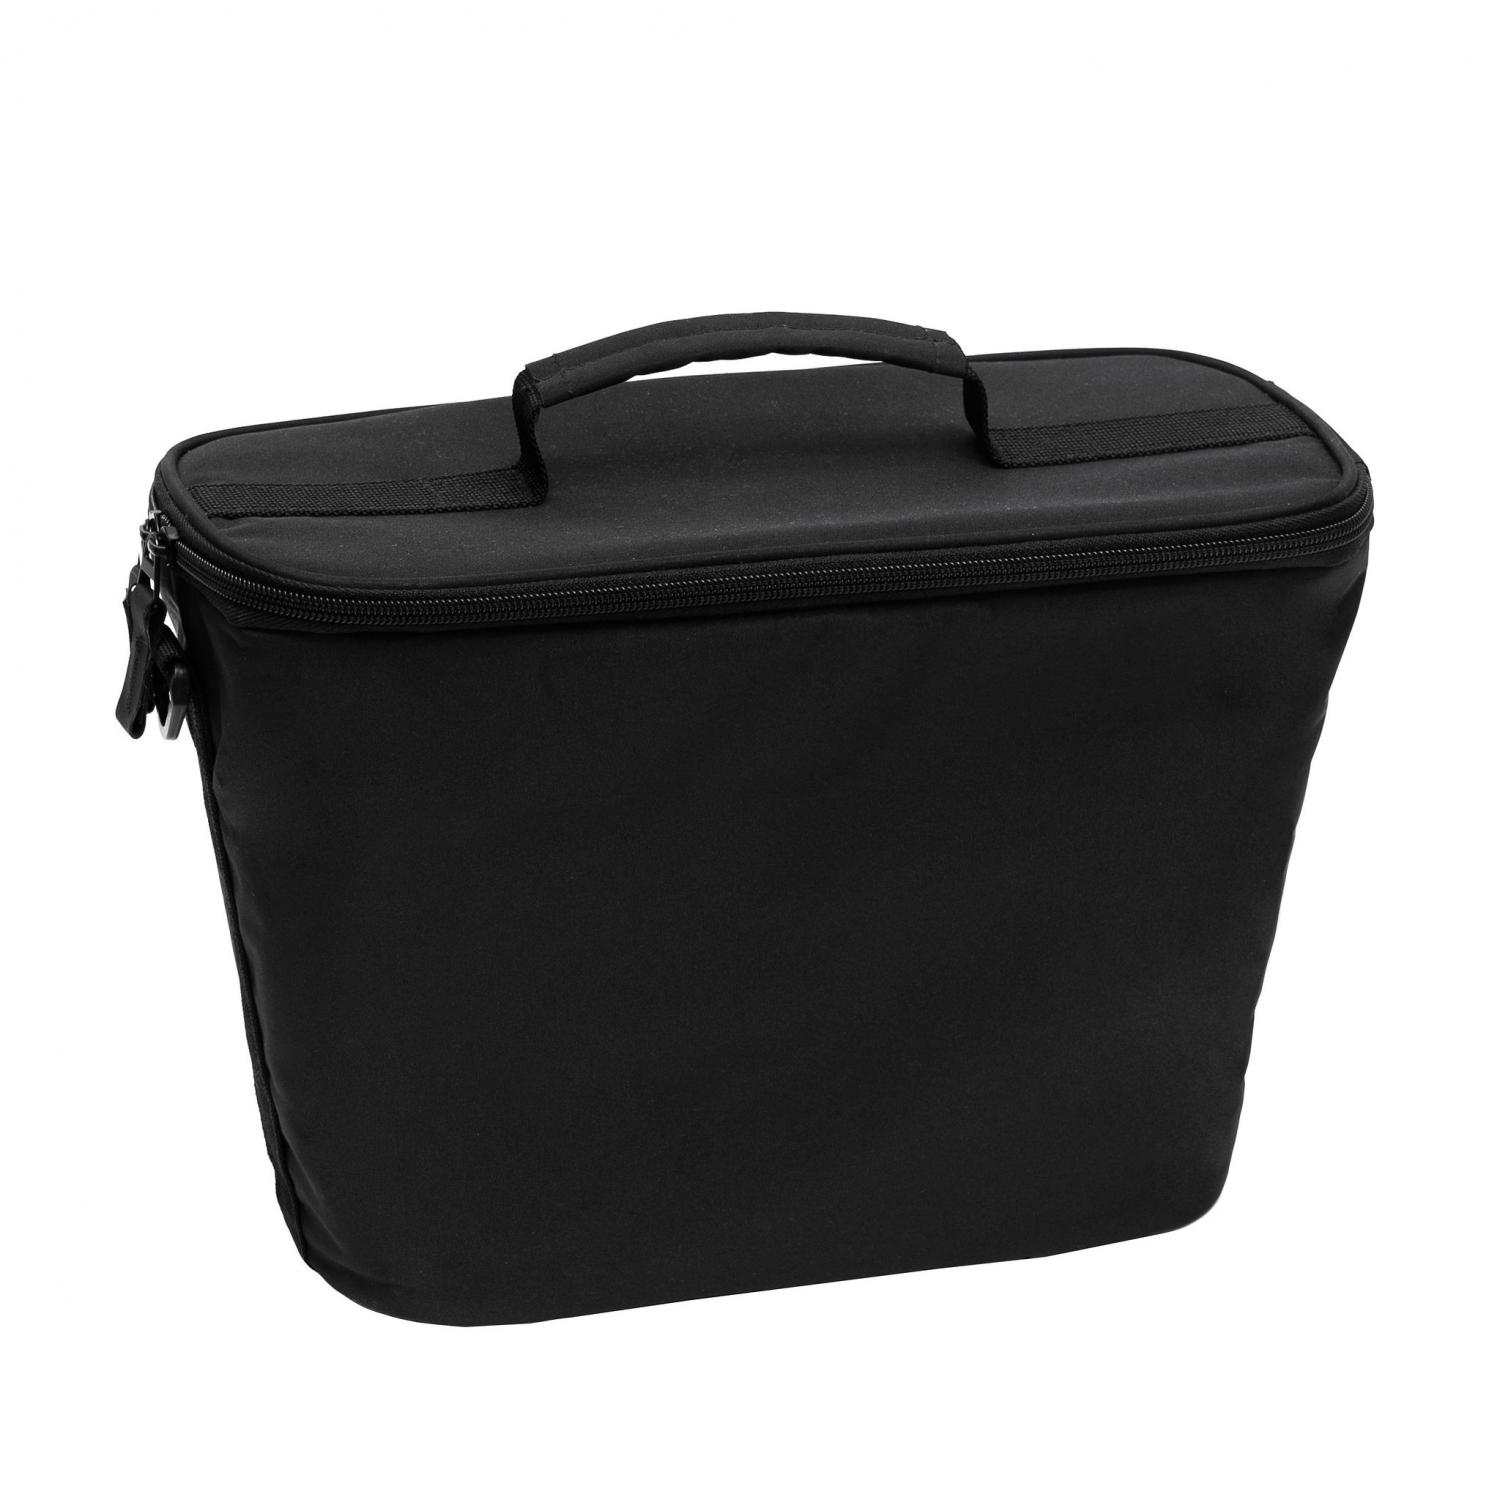 Hinza small Cooler bag with a removable shoulder strap.